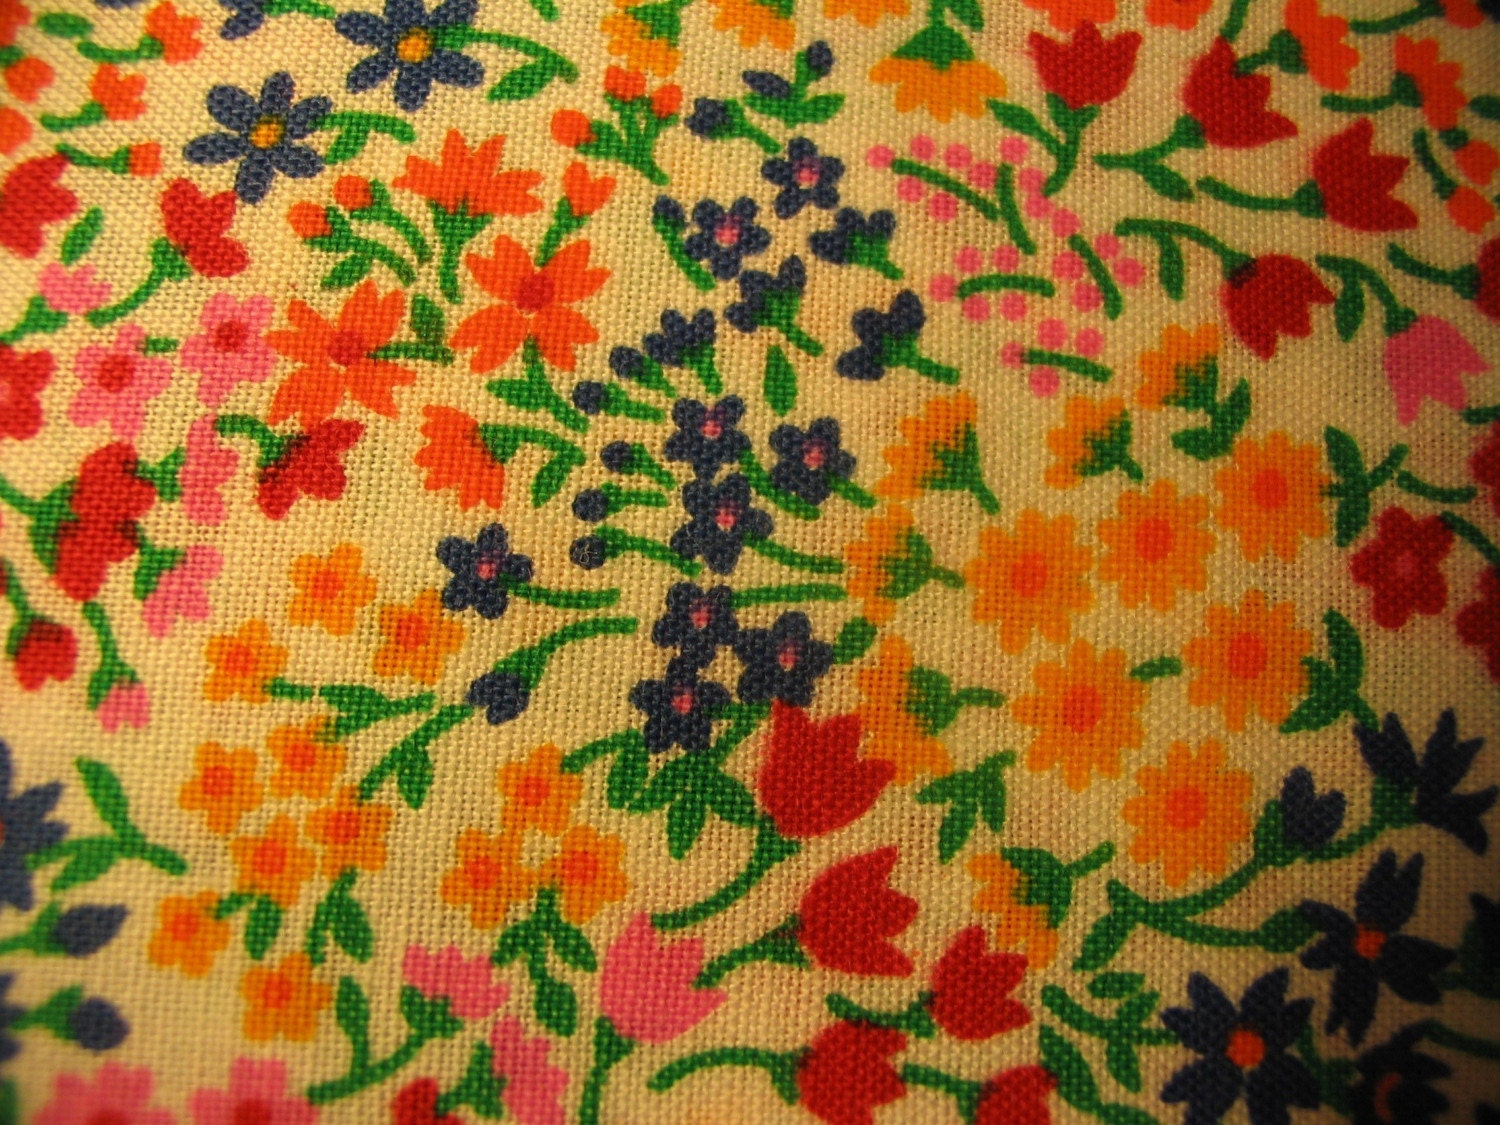 Vintage 1970s 1960s Calico Quilt Fabric Multi Colored flowers 18 inches 45.7 Centimeters